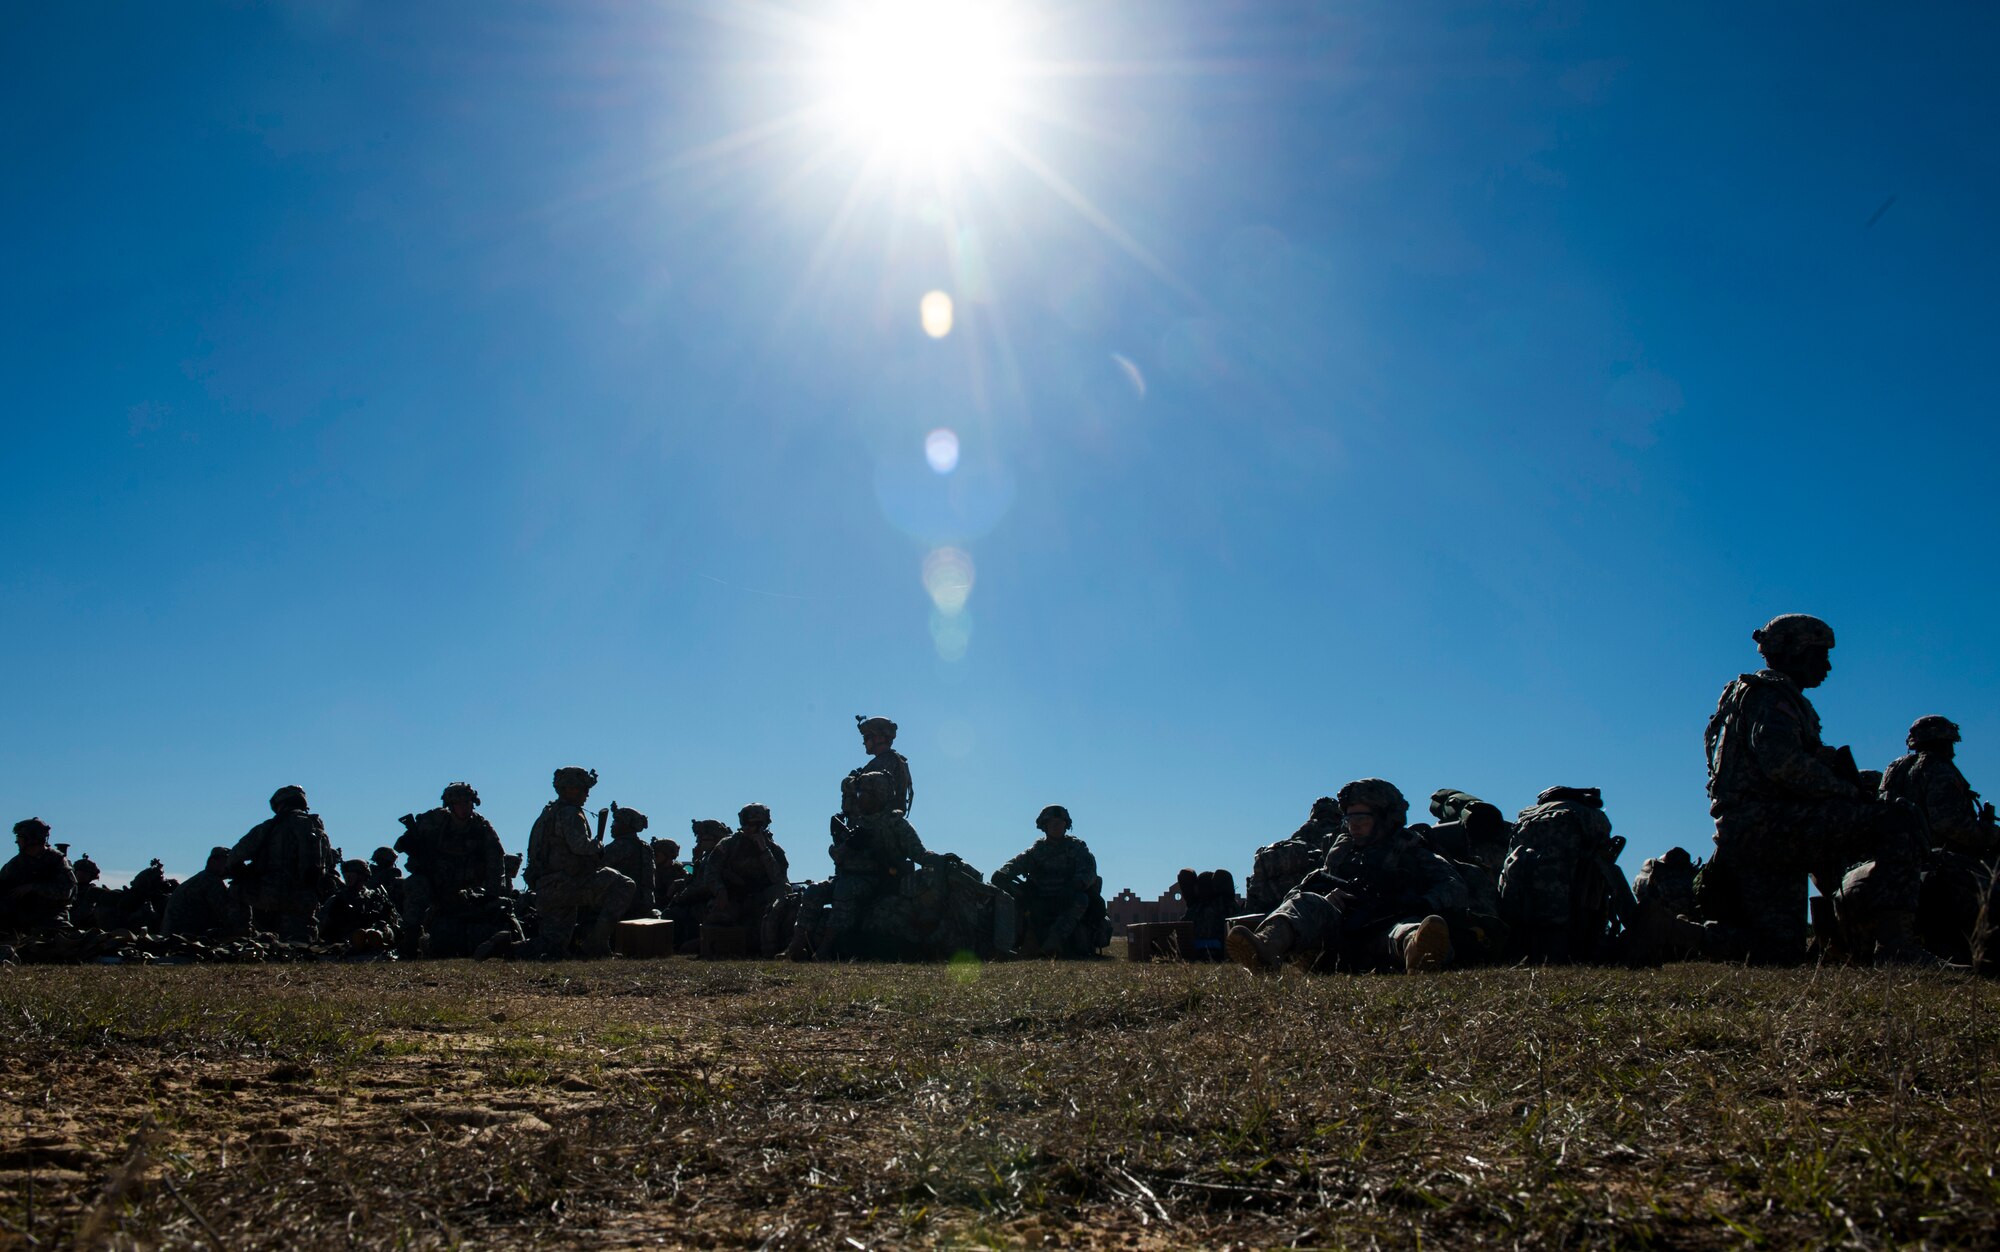 Members of the U.S. Army 1st Brigade 10th Mountain Division stationed at Fort Drum, N.Y., rest during an exercise at a the Joint Readiness Training Center at Fort Polk, La., Jan. 18, 2015. JRTC is a 34th Combat Training Squadron exercise for the U.S. Army that improves unit readiness by providing realistic, stressful, joint and combined arms training across the full spectrum of conflict. (U.S. Air Force photo/Staff Sgt. Gustavo Gonzalez/RELEASED)